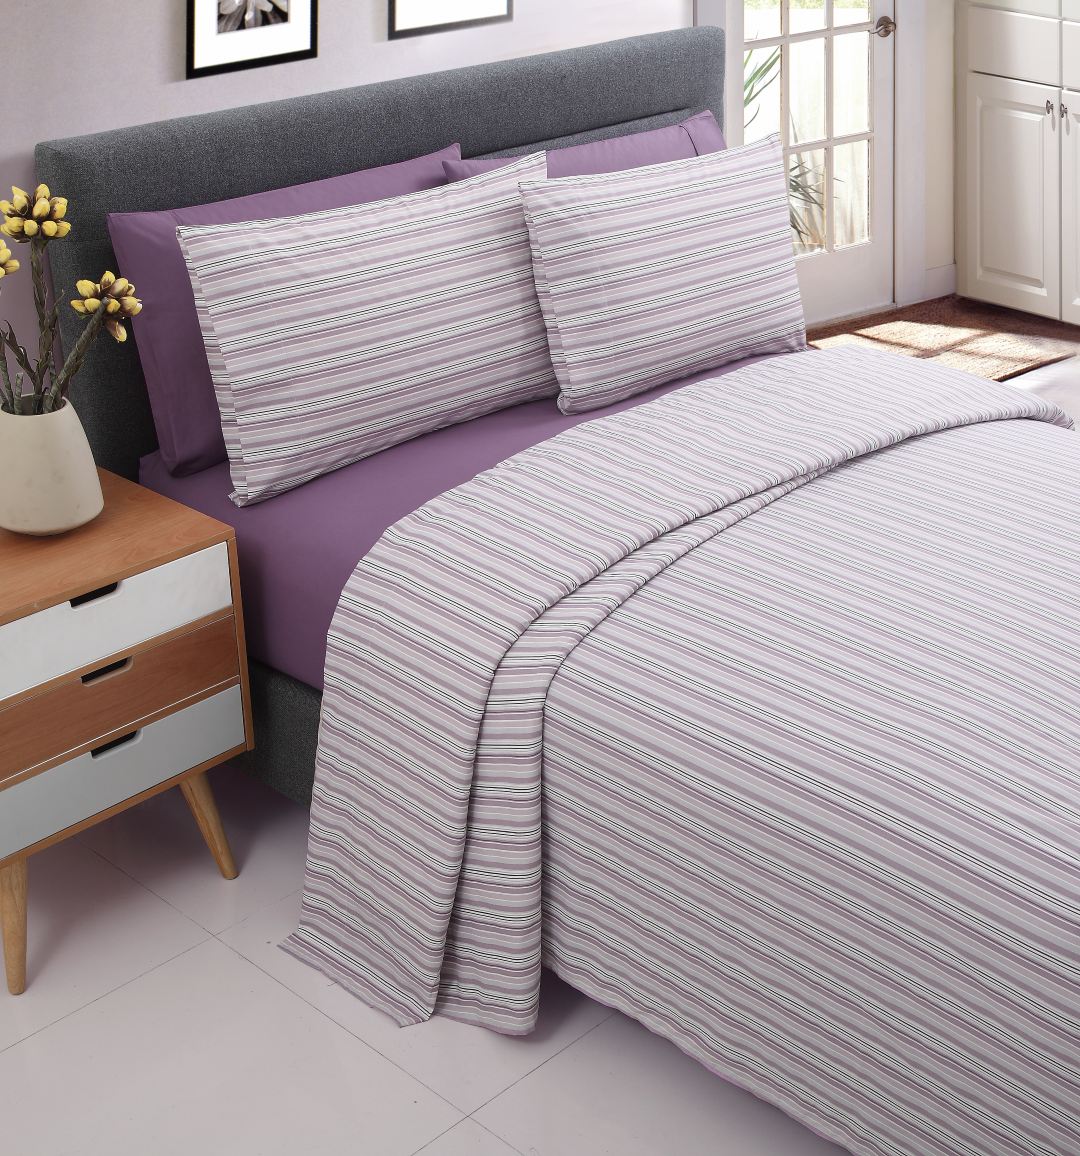 VCNY Home Hatteras 6PC  Sheet Set in Purple